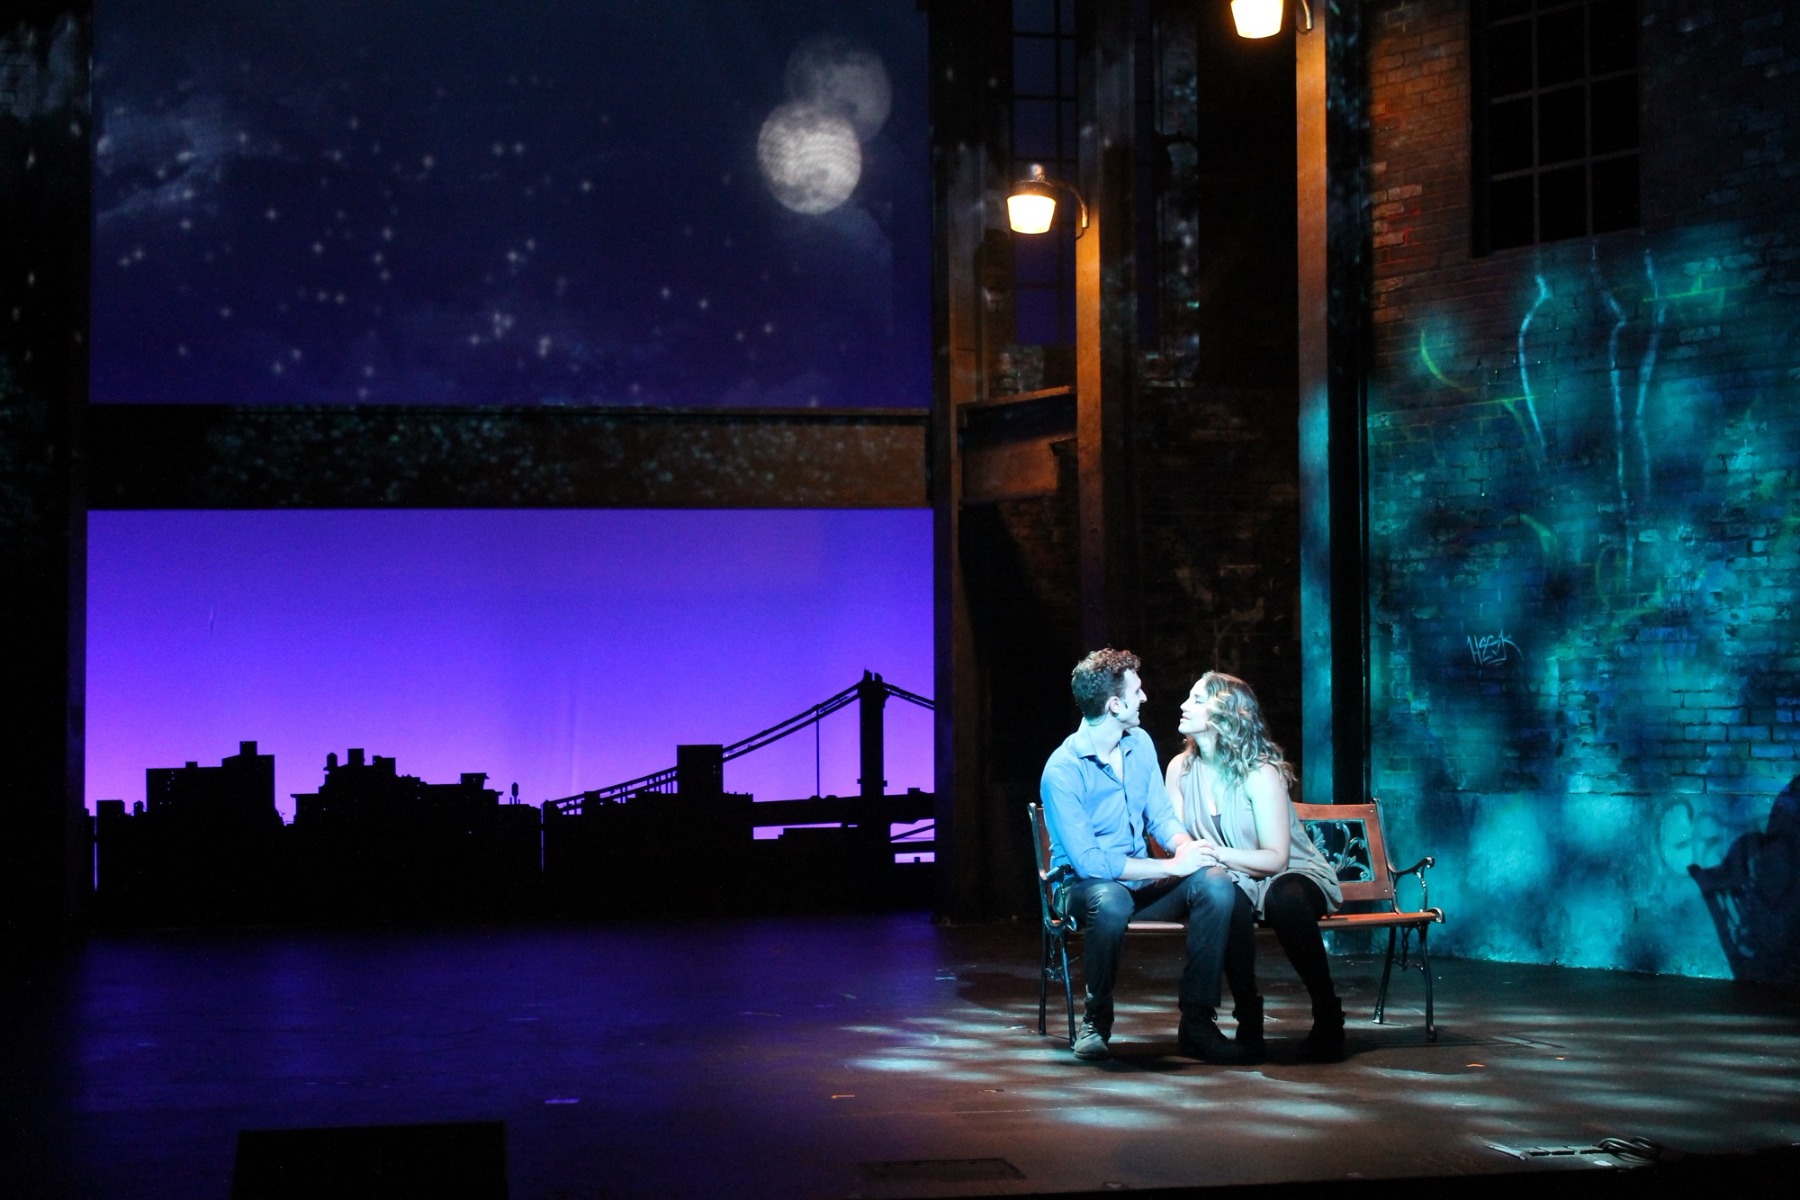 Elation Satura Profile™, Platinum Seven™ Light “Ghost the Musical”Gallery Image ghost the musical 1 